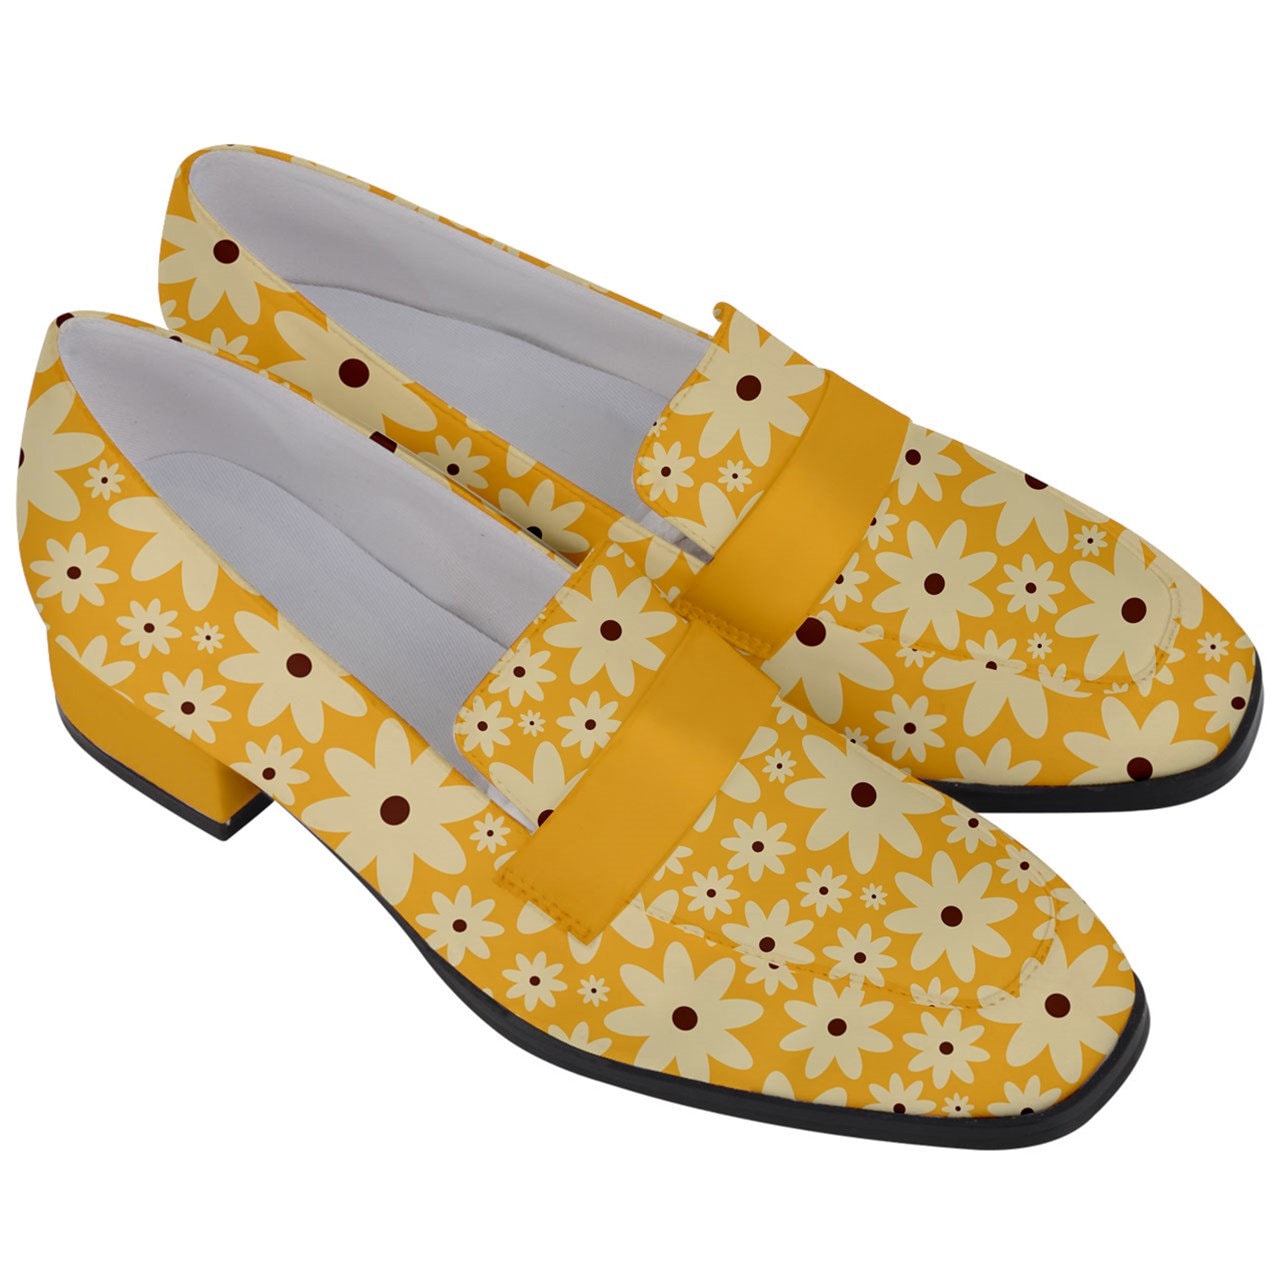 Yellow Loafers, Loafers Women, Yellow Shoes Women, Loafers Vintage Style, Pin up Loafers, Daisy Shoes, Chunky Heels Women, retro shoes